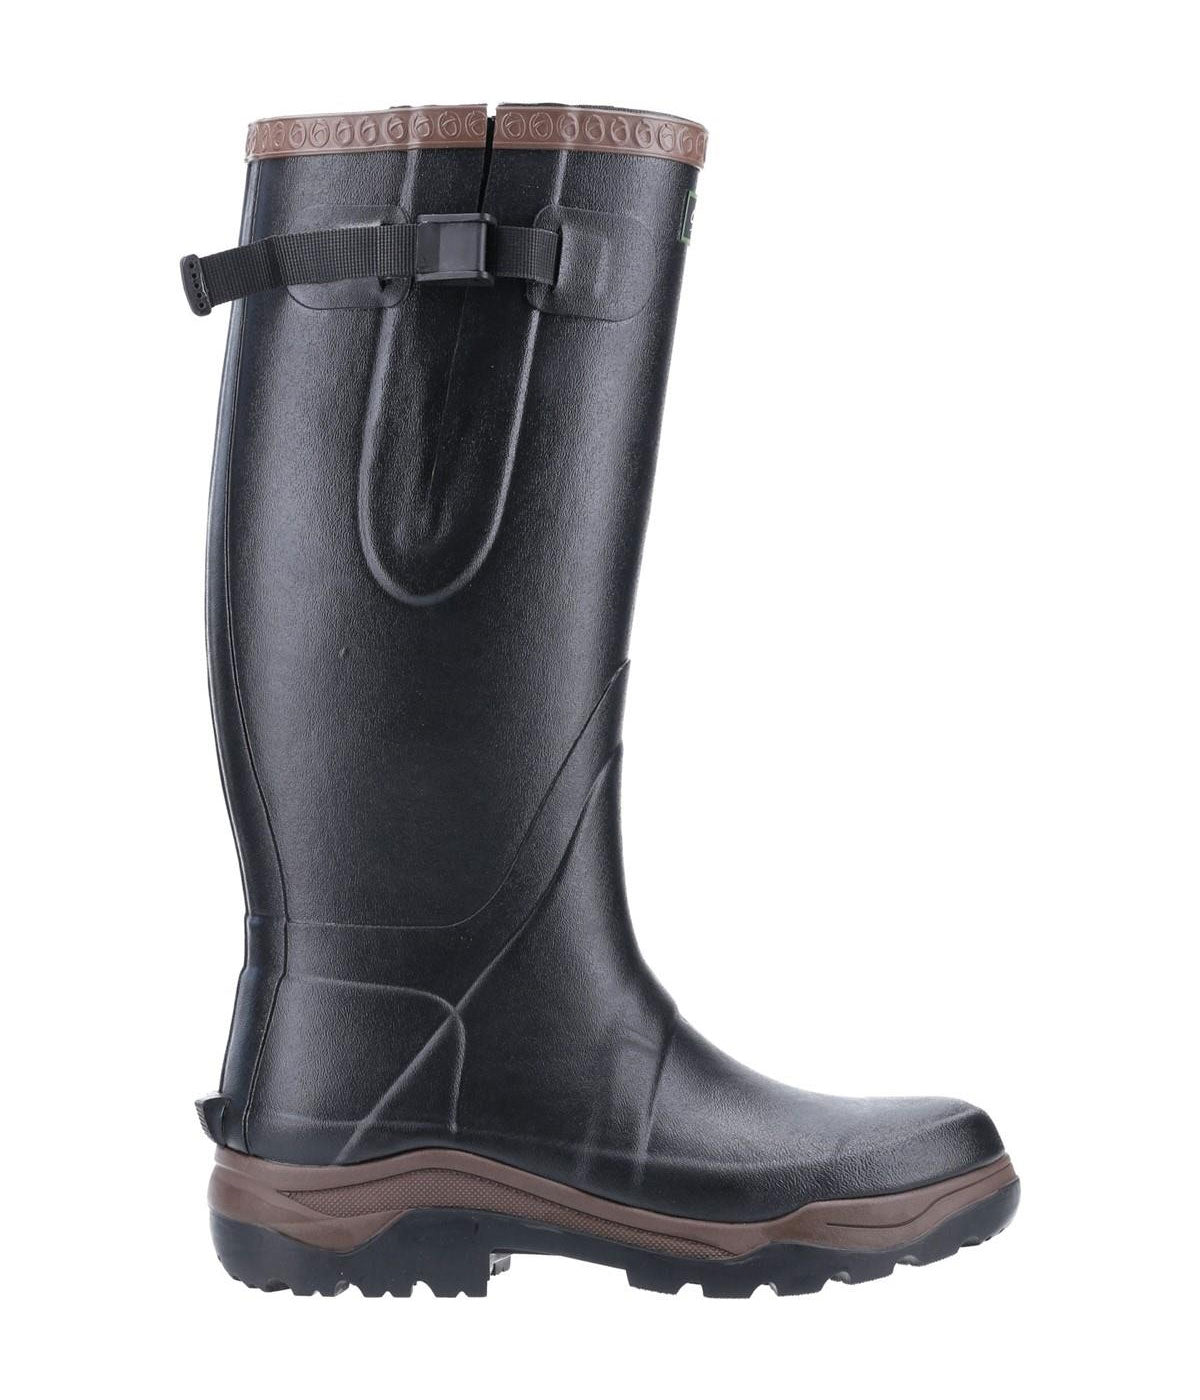 Black Cotswold Compass Rubber Neoprene Lined Wellington Boots 